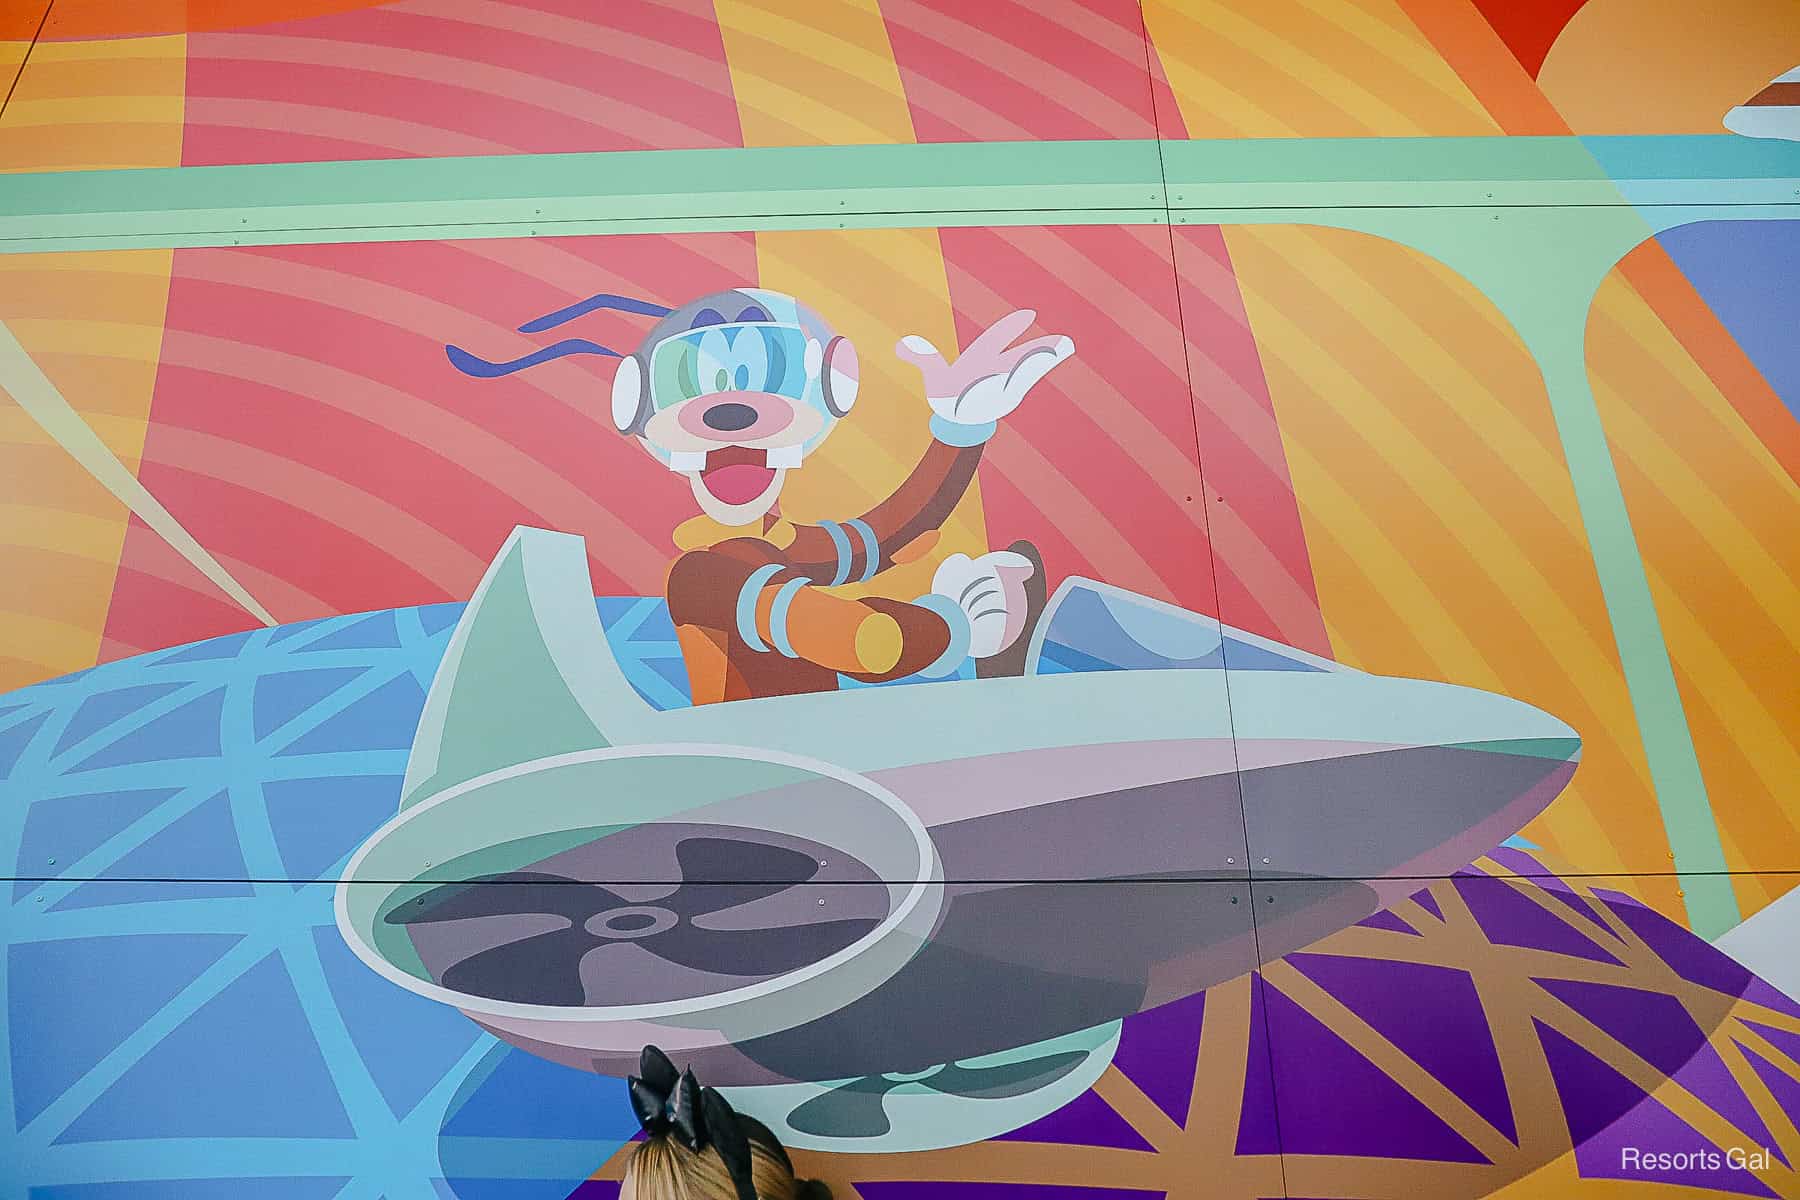 Goofy in a spaceship mural with reference to Spaceship Earth 